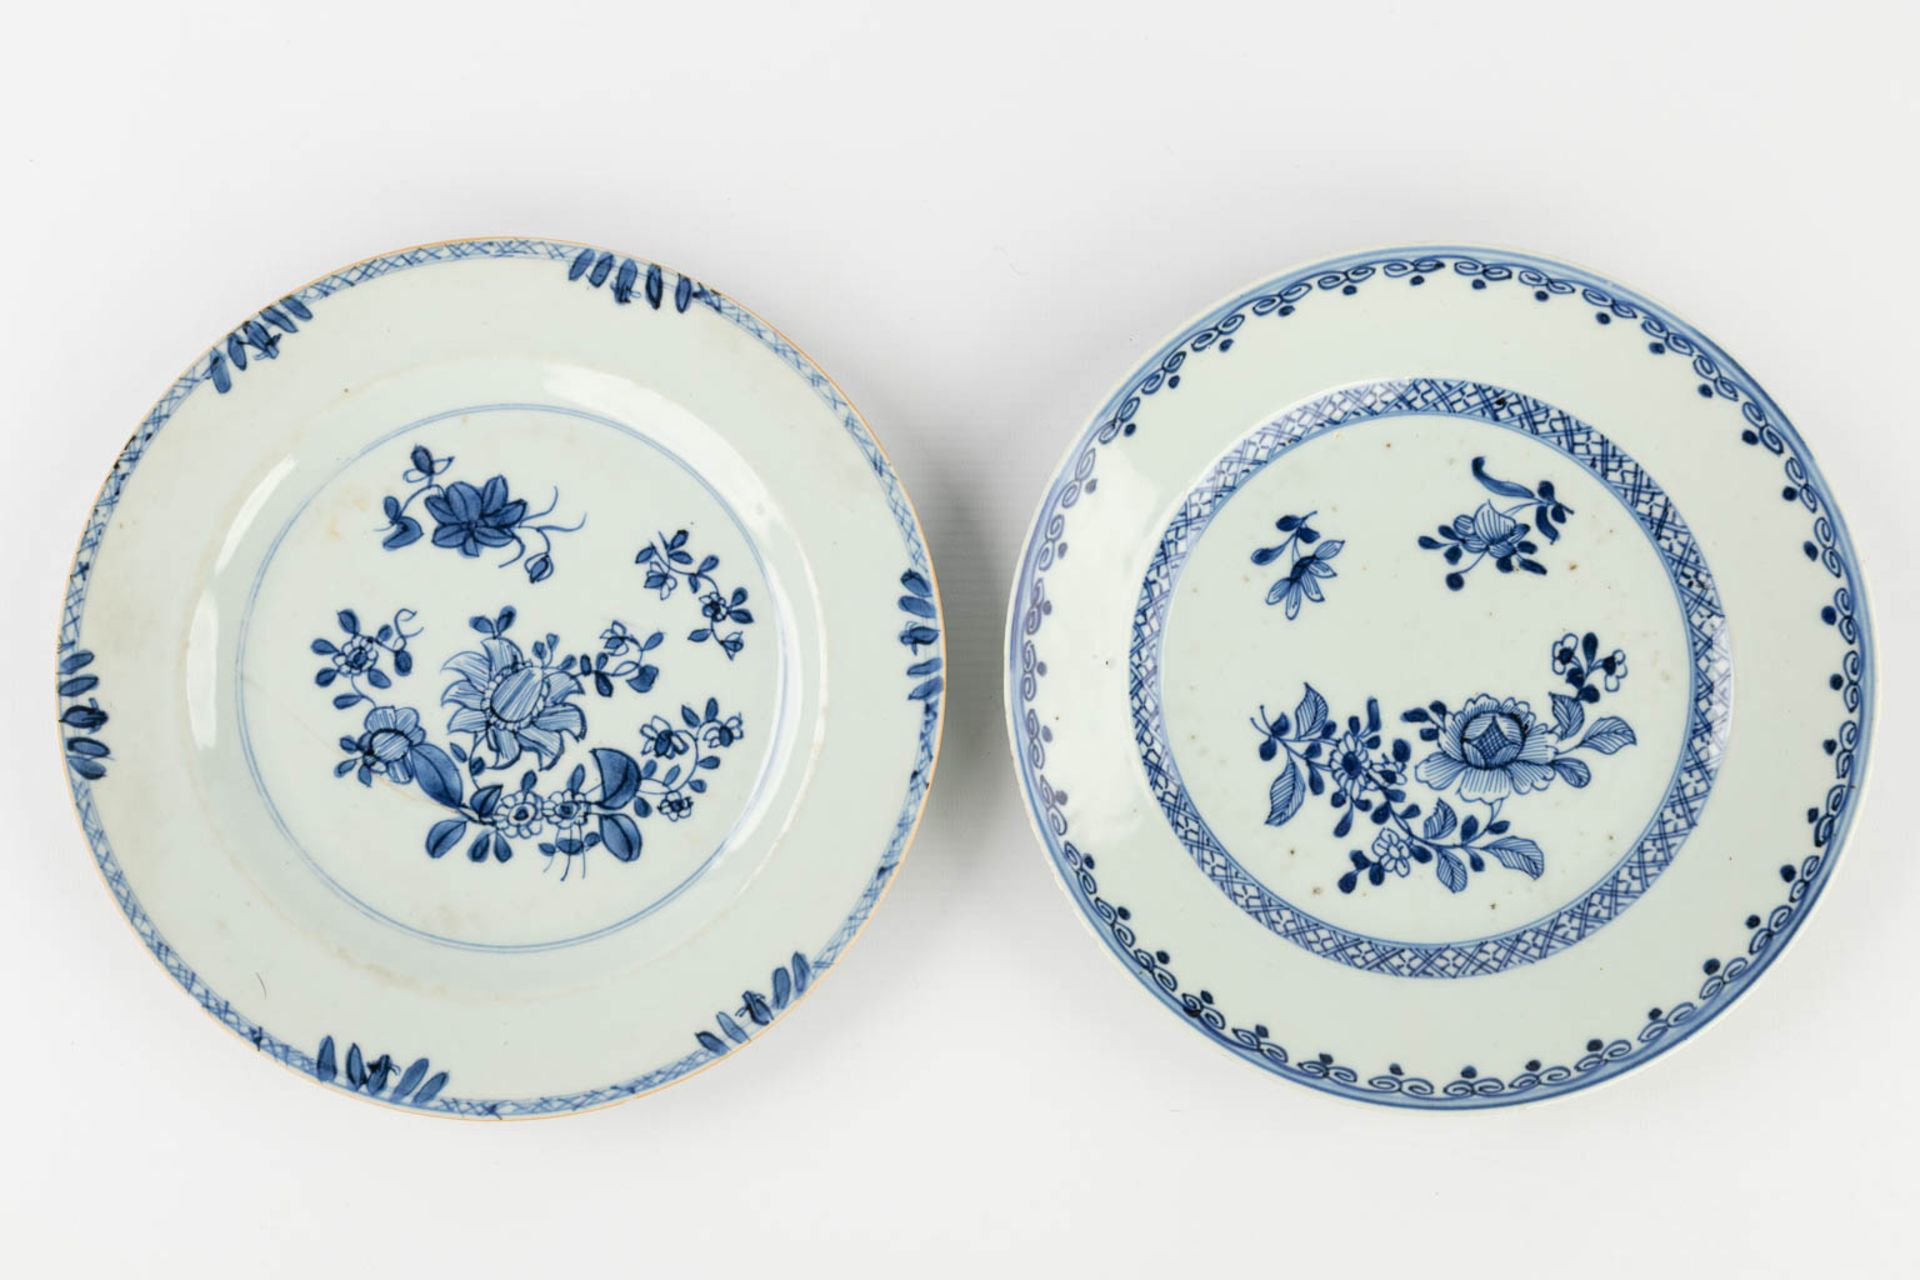 Nine Chinese blue-white decor, of which one has a silver holder. 19th/20th C. (D:23,5 cm) - Image 3 of 16